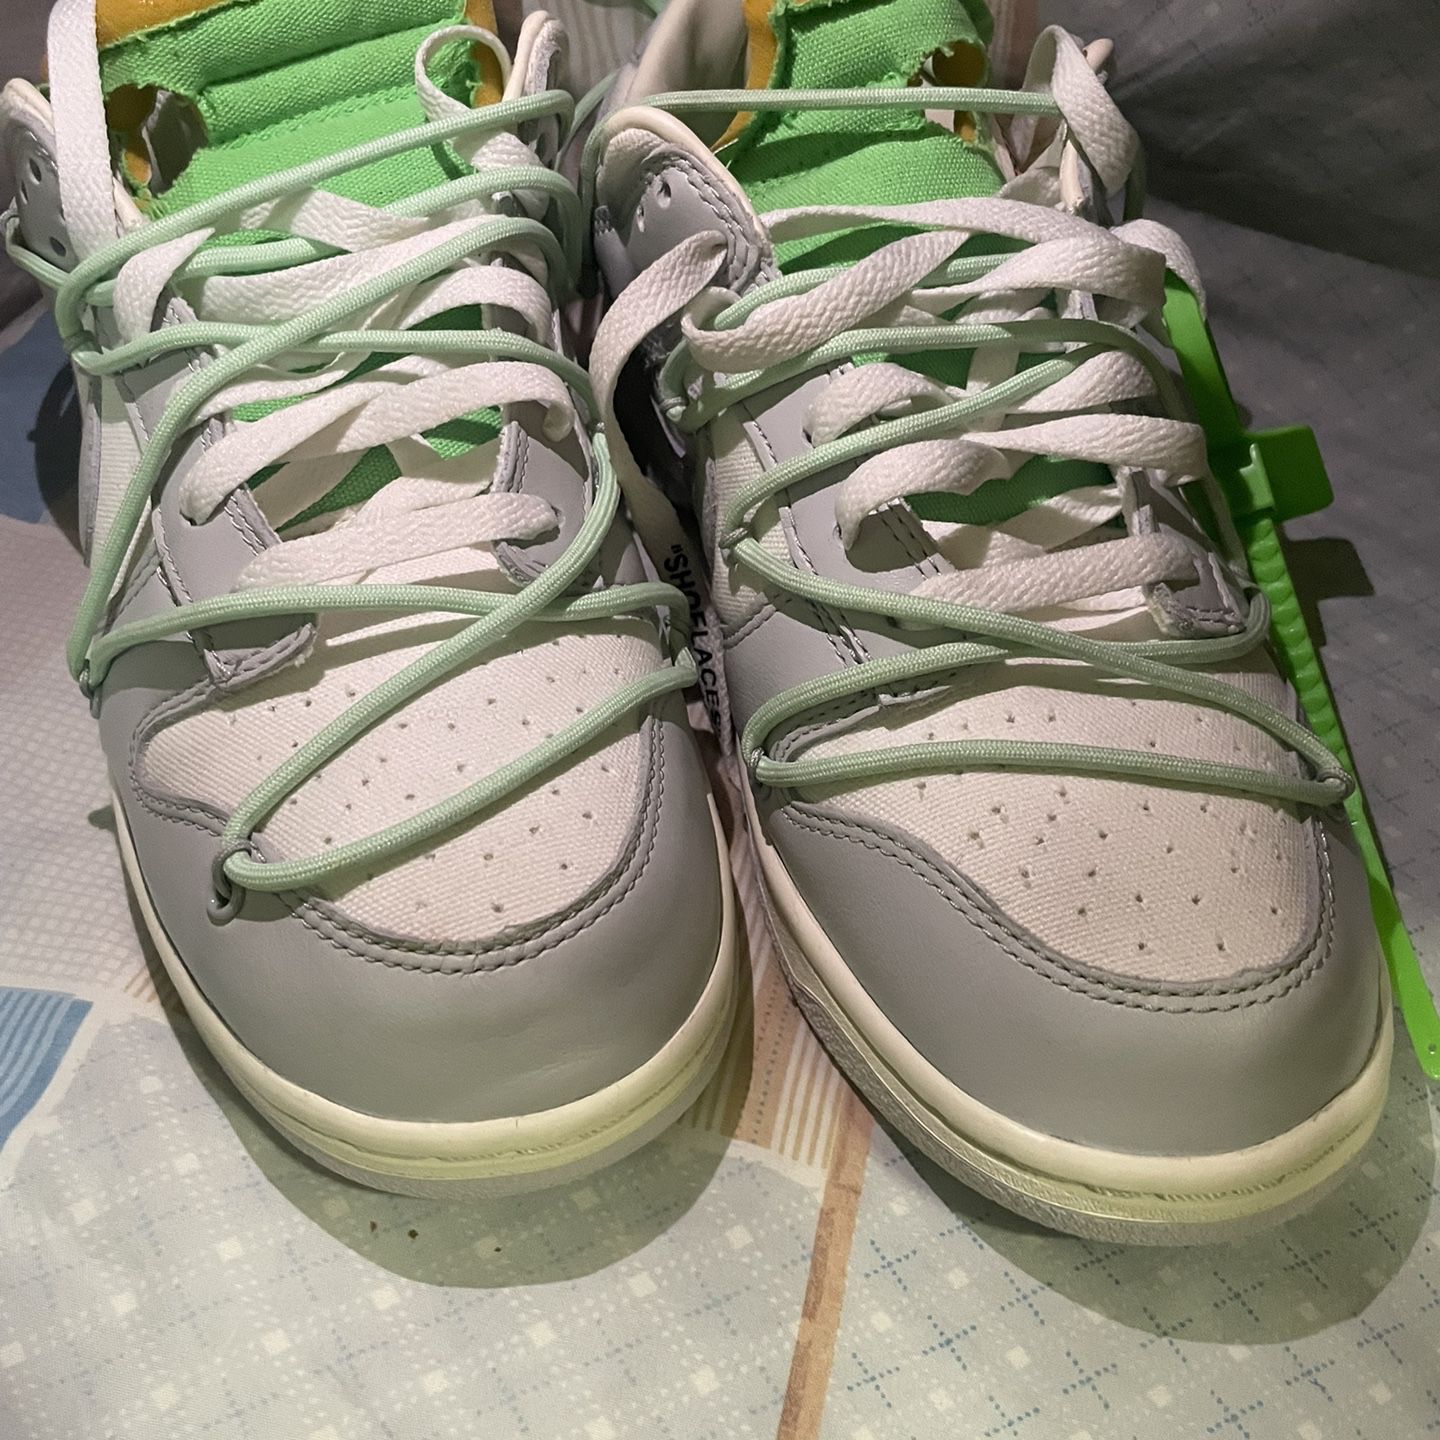 Off-White X Nike Dunk Low Lot 7 for Sale in Brooklyn, NY - OfferUp